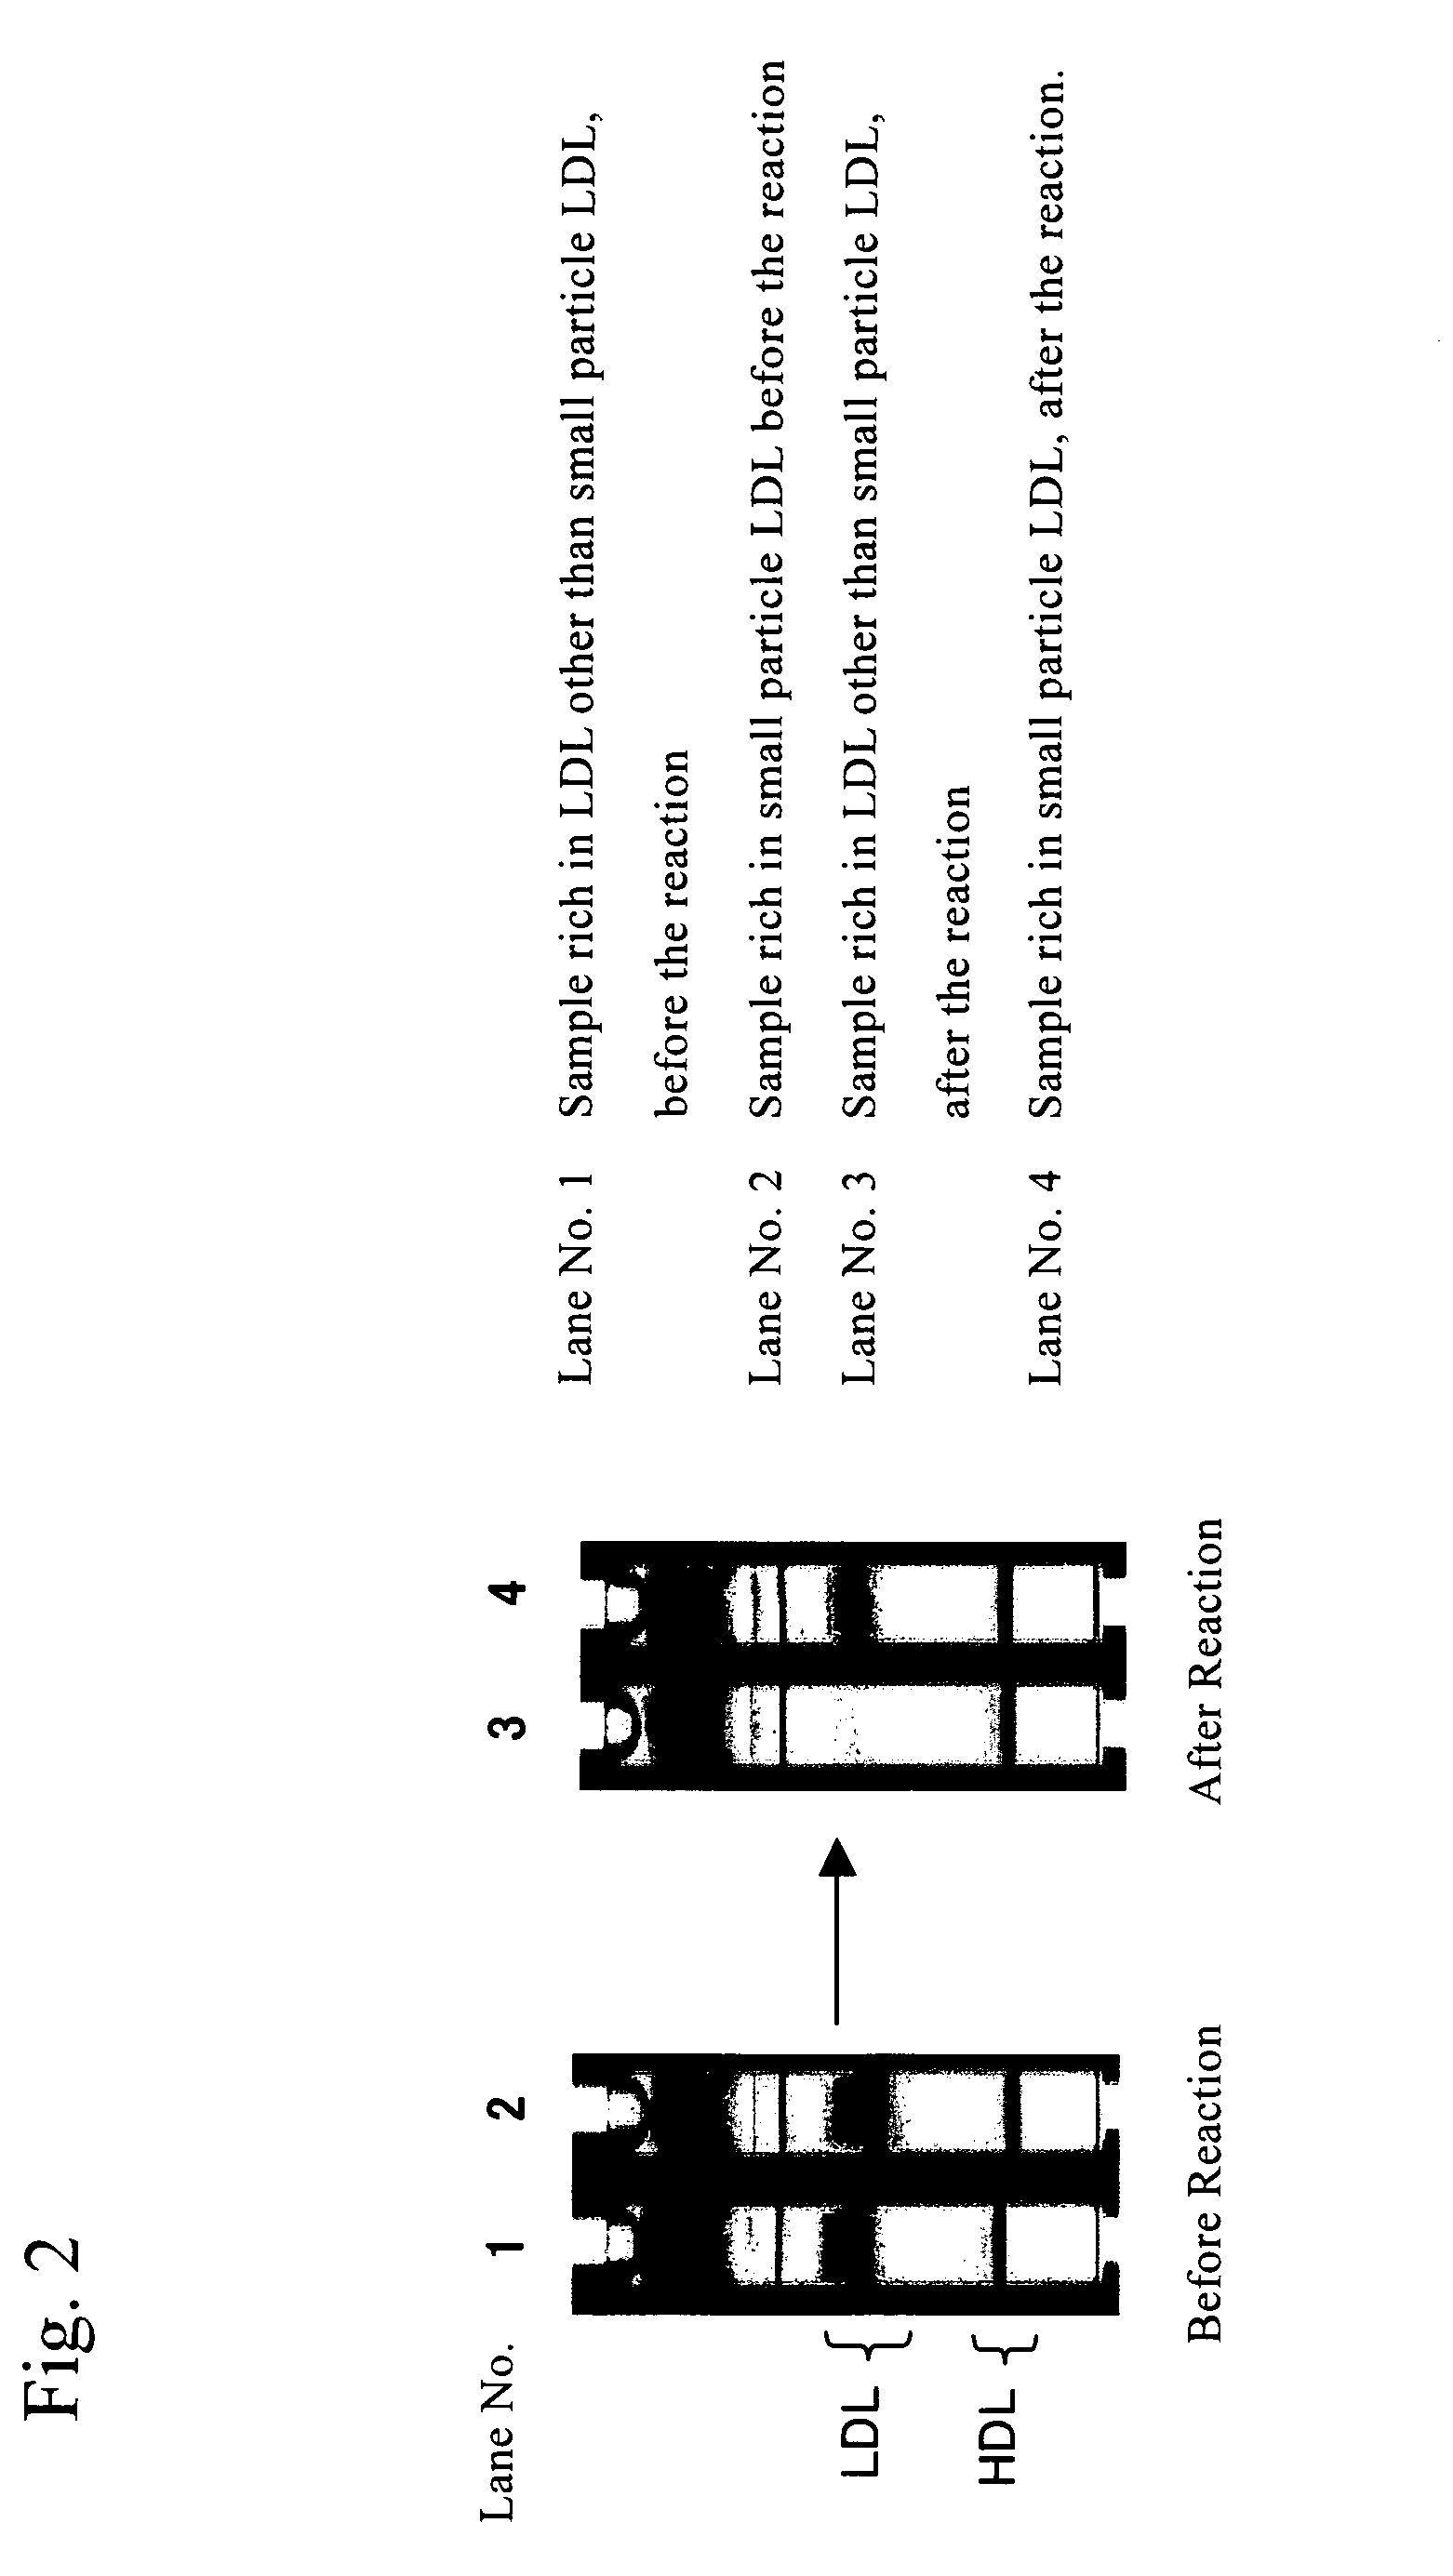 Method of quantifying small-sized low density lipoprotein